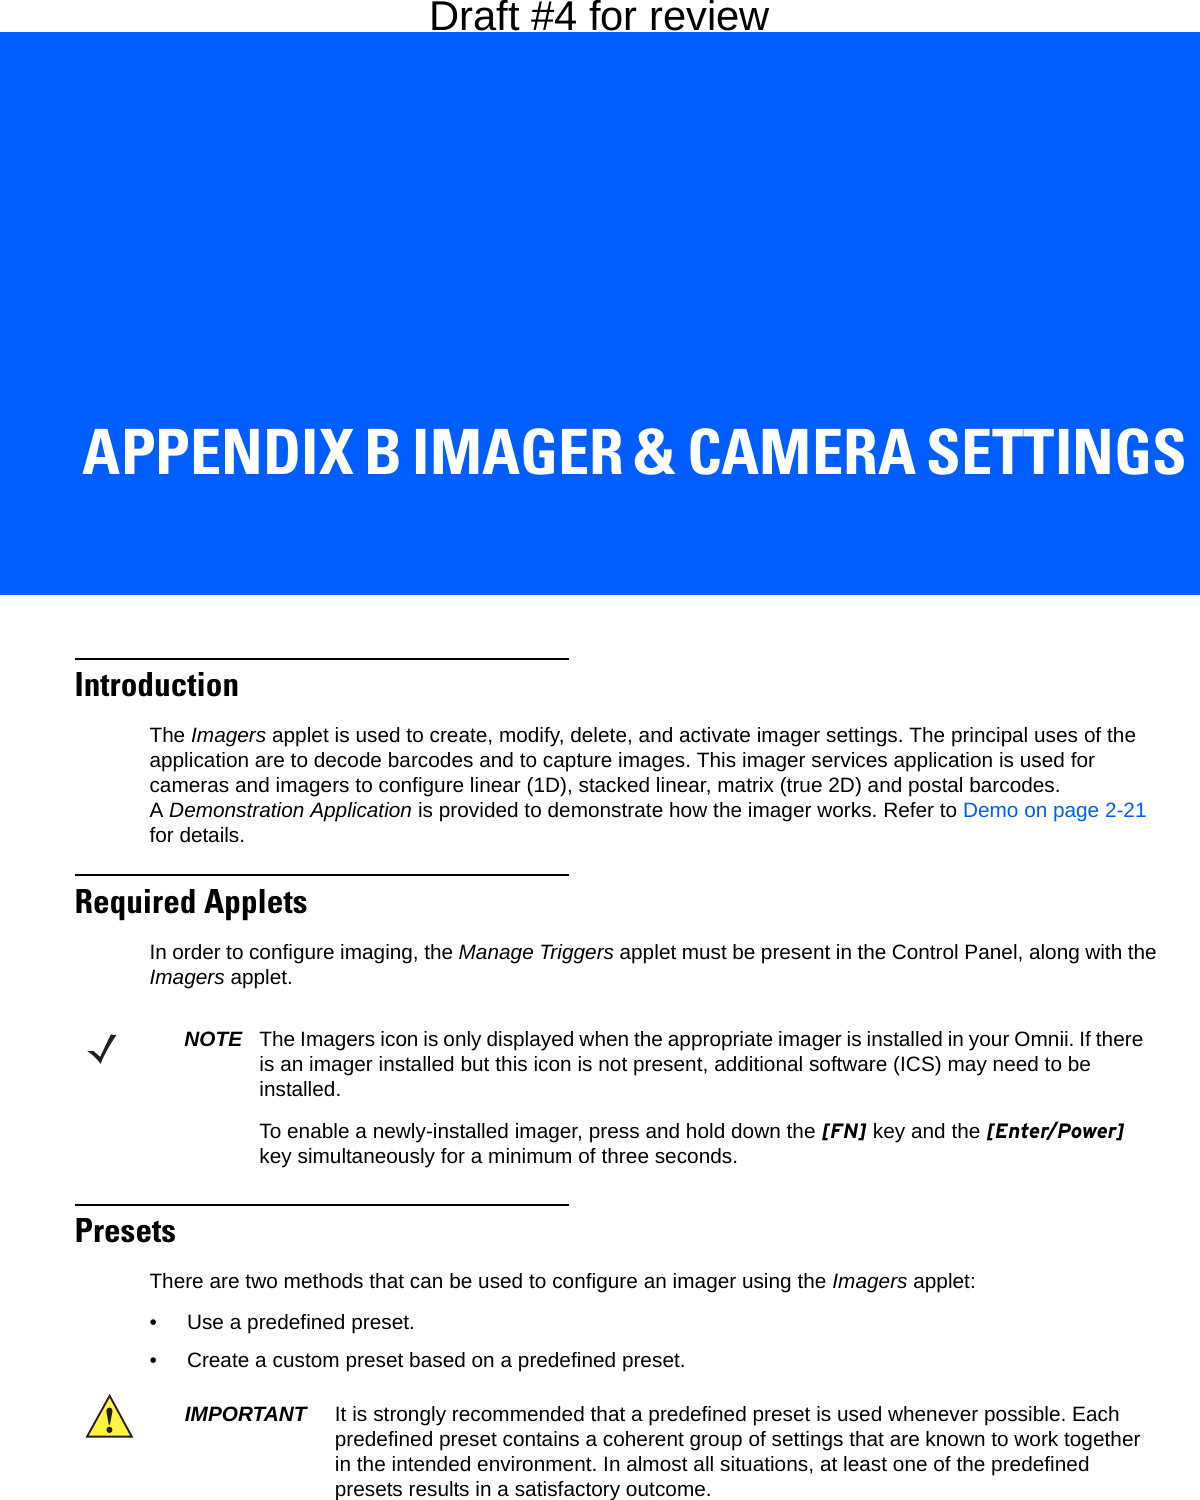 APPENDIX B IMAGER &amp; CAMERA SETTINGSBImager &amp; Camera SettingsIntroductionThe Imagers applet is used to create, modify, delete, and activate imager settings. The principal uses of the application are to decode barcodes and to capture images. This imager services application is used for cameras and imagers to configure linear (1D), stacked linear, matrix (true 2D) and postal barcodes. ADemonstration Application is provided to demonstrate how the imager works. Refer to Demo on page 2-21 for details.Required AppletsIn order to configure imaging, the Manage Triggers applet must be present in the Control Panel, along with the Imagers applet. Presets There are two methods that can be used to configure an imager using the Imagers applet:• Use a predefined preset.• Create a custom preset based on a predefined preset.NOTE The Imagers icon is only displayed when the appropriate imager is installed in your Omnii. If there is an imager installed but this icon is not present, additional software (ICS) may need to be installed.To enable a newly-installed imager, press and hold down the [FN] key and the [Enter/Power] key simultaneously for a minimum of three seconds. IMPORTANT It is strongly recommended that a predefined preset is used whenever possible. Each predefined preset contains a coherent group of settings that are known to work together in the intended environment. In almost all situations, at least one of the predefined presets results in a satisfactory outcome.Draft #4 for review